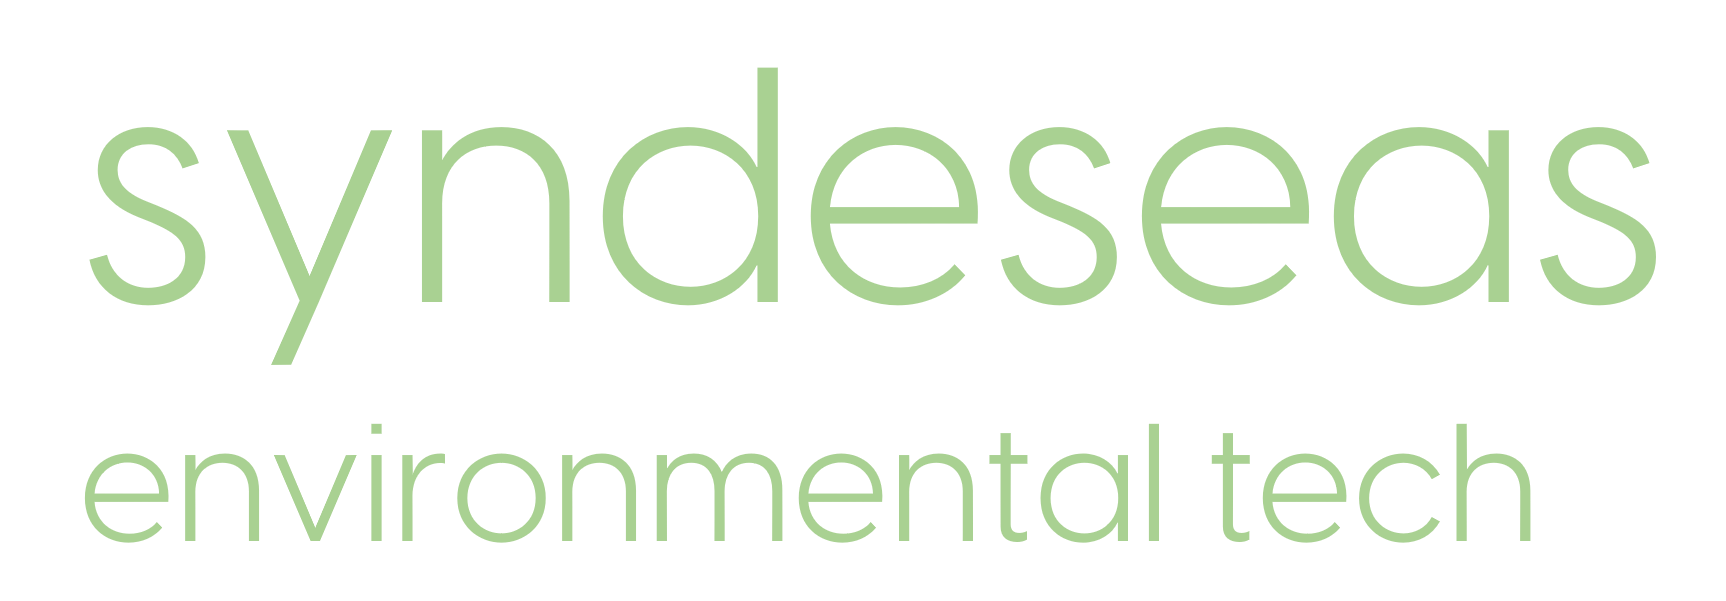 Enviromentality - Powered by Syndeseas